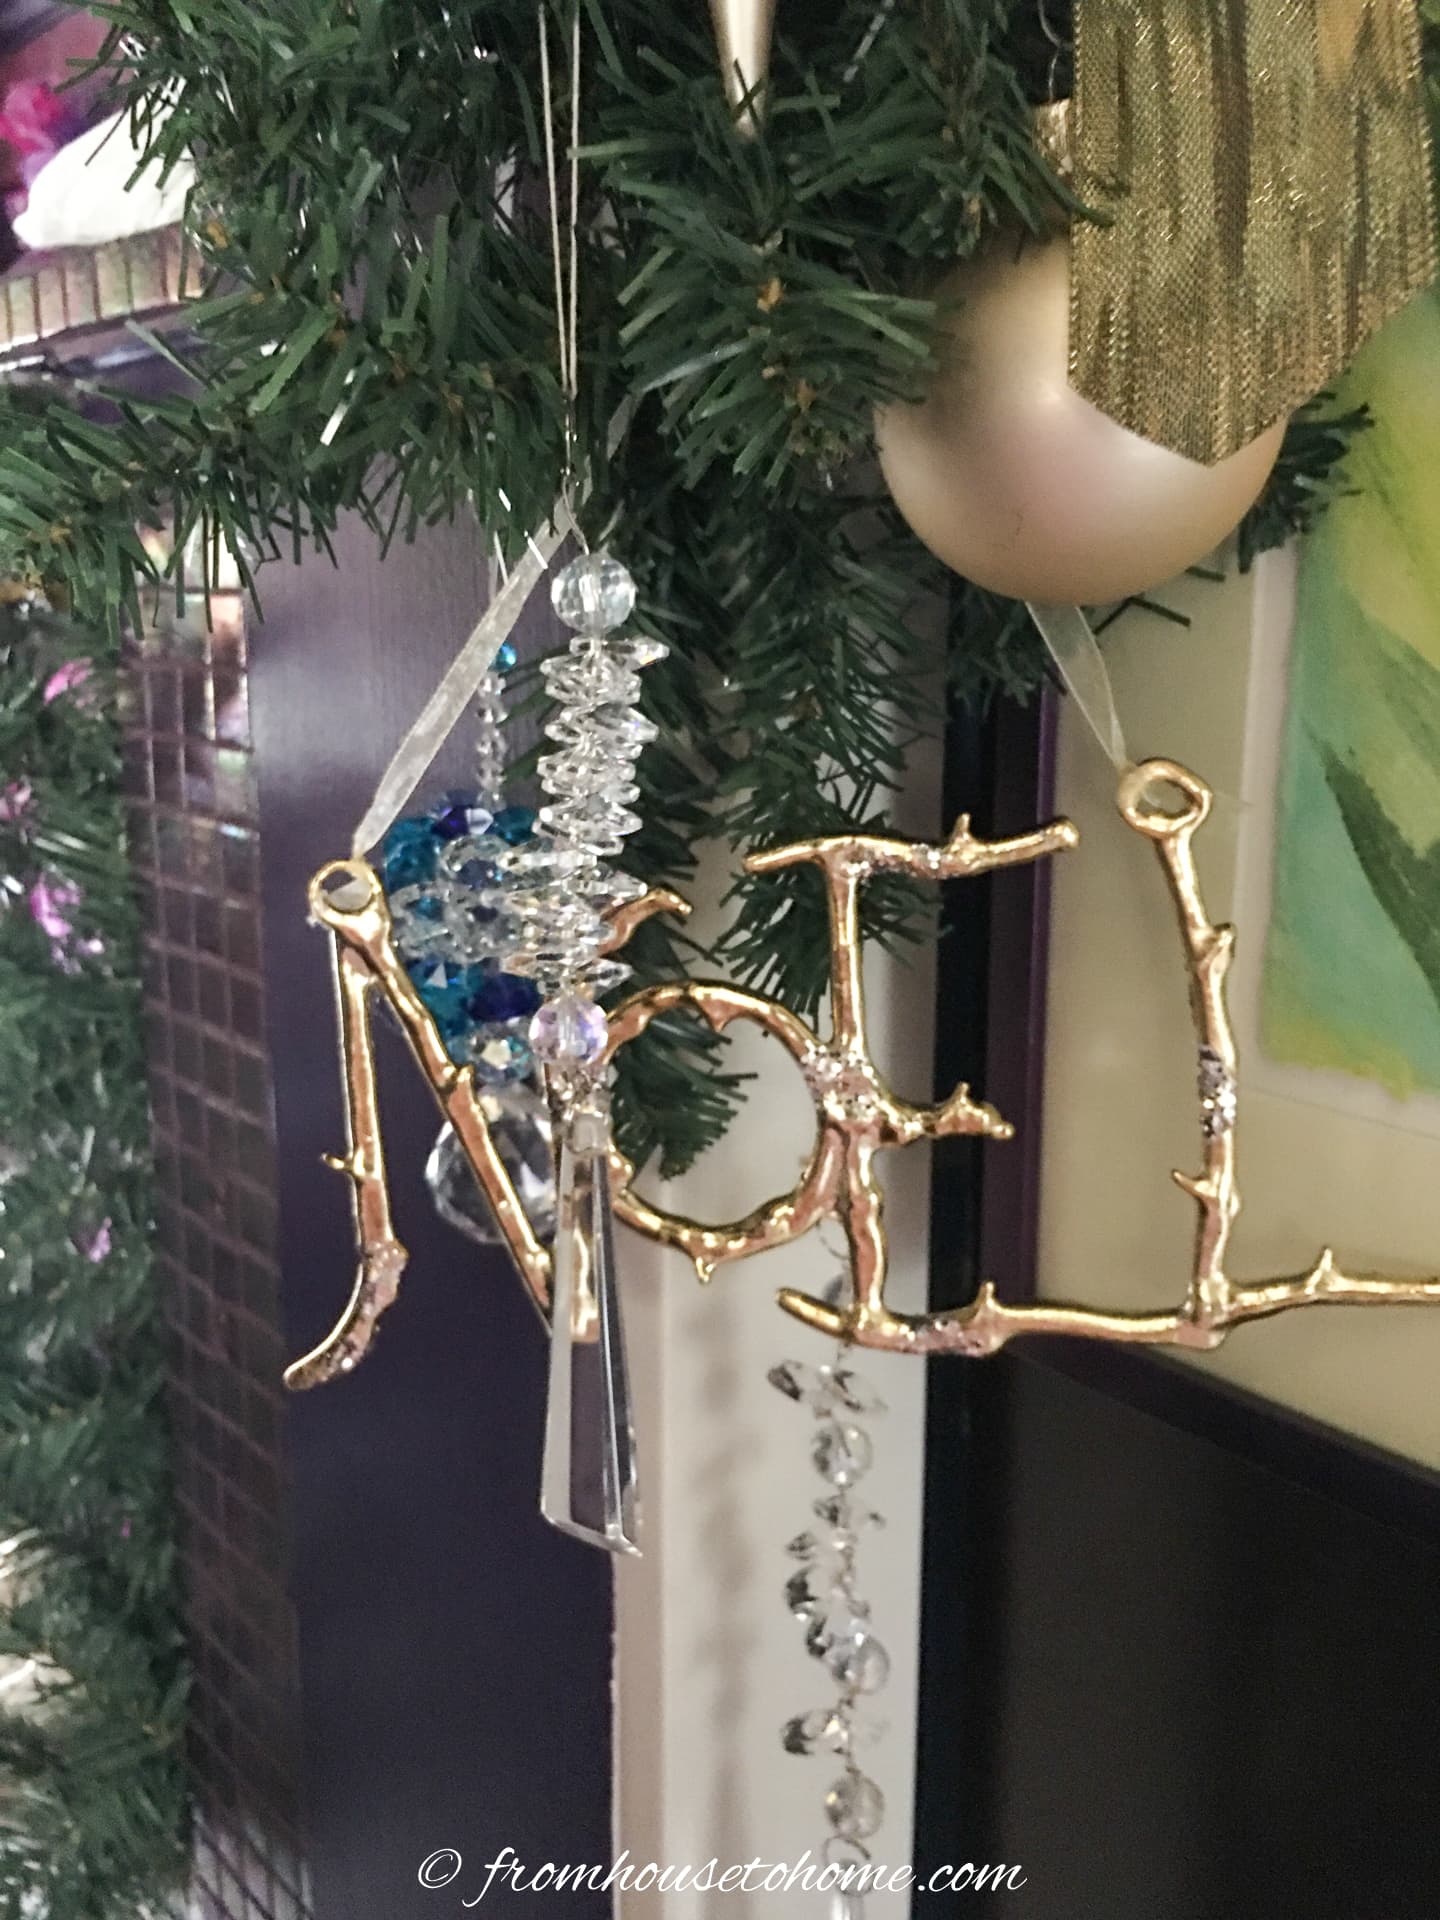 Gold and crystal ornaments hung from a green garland